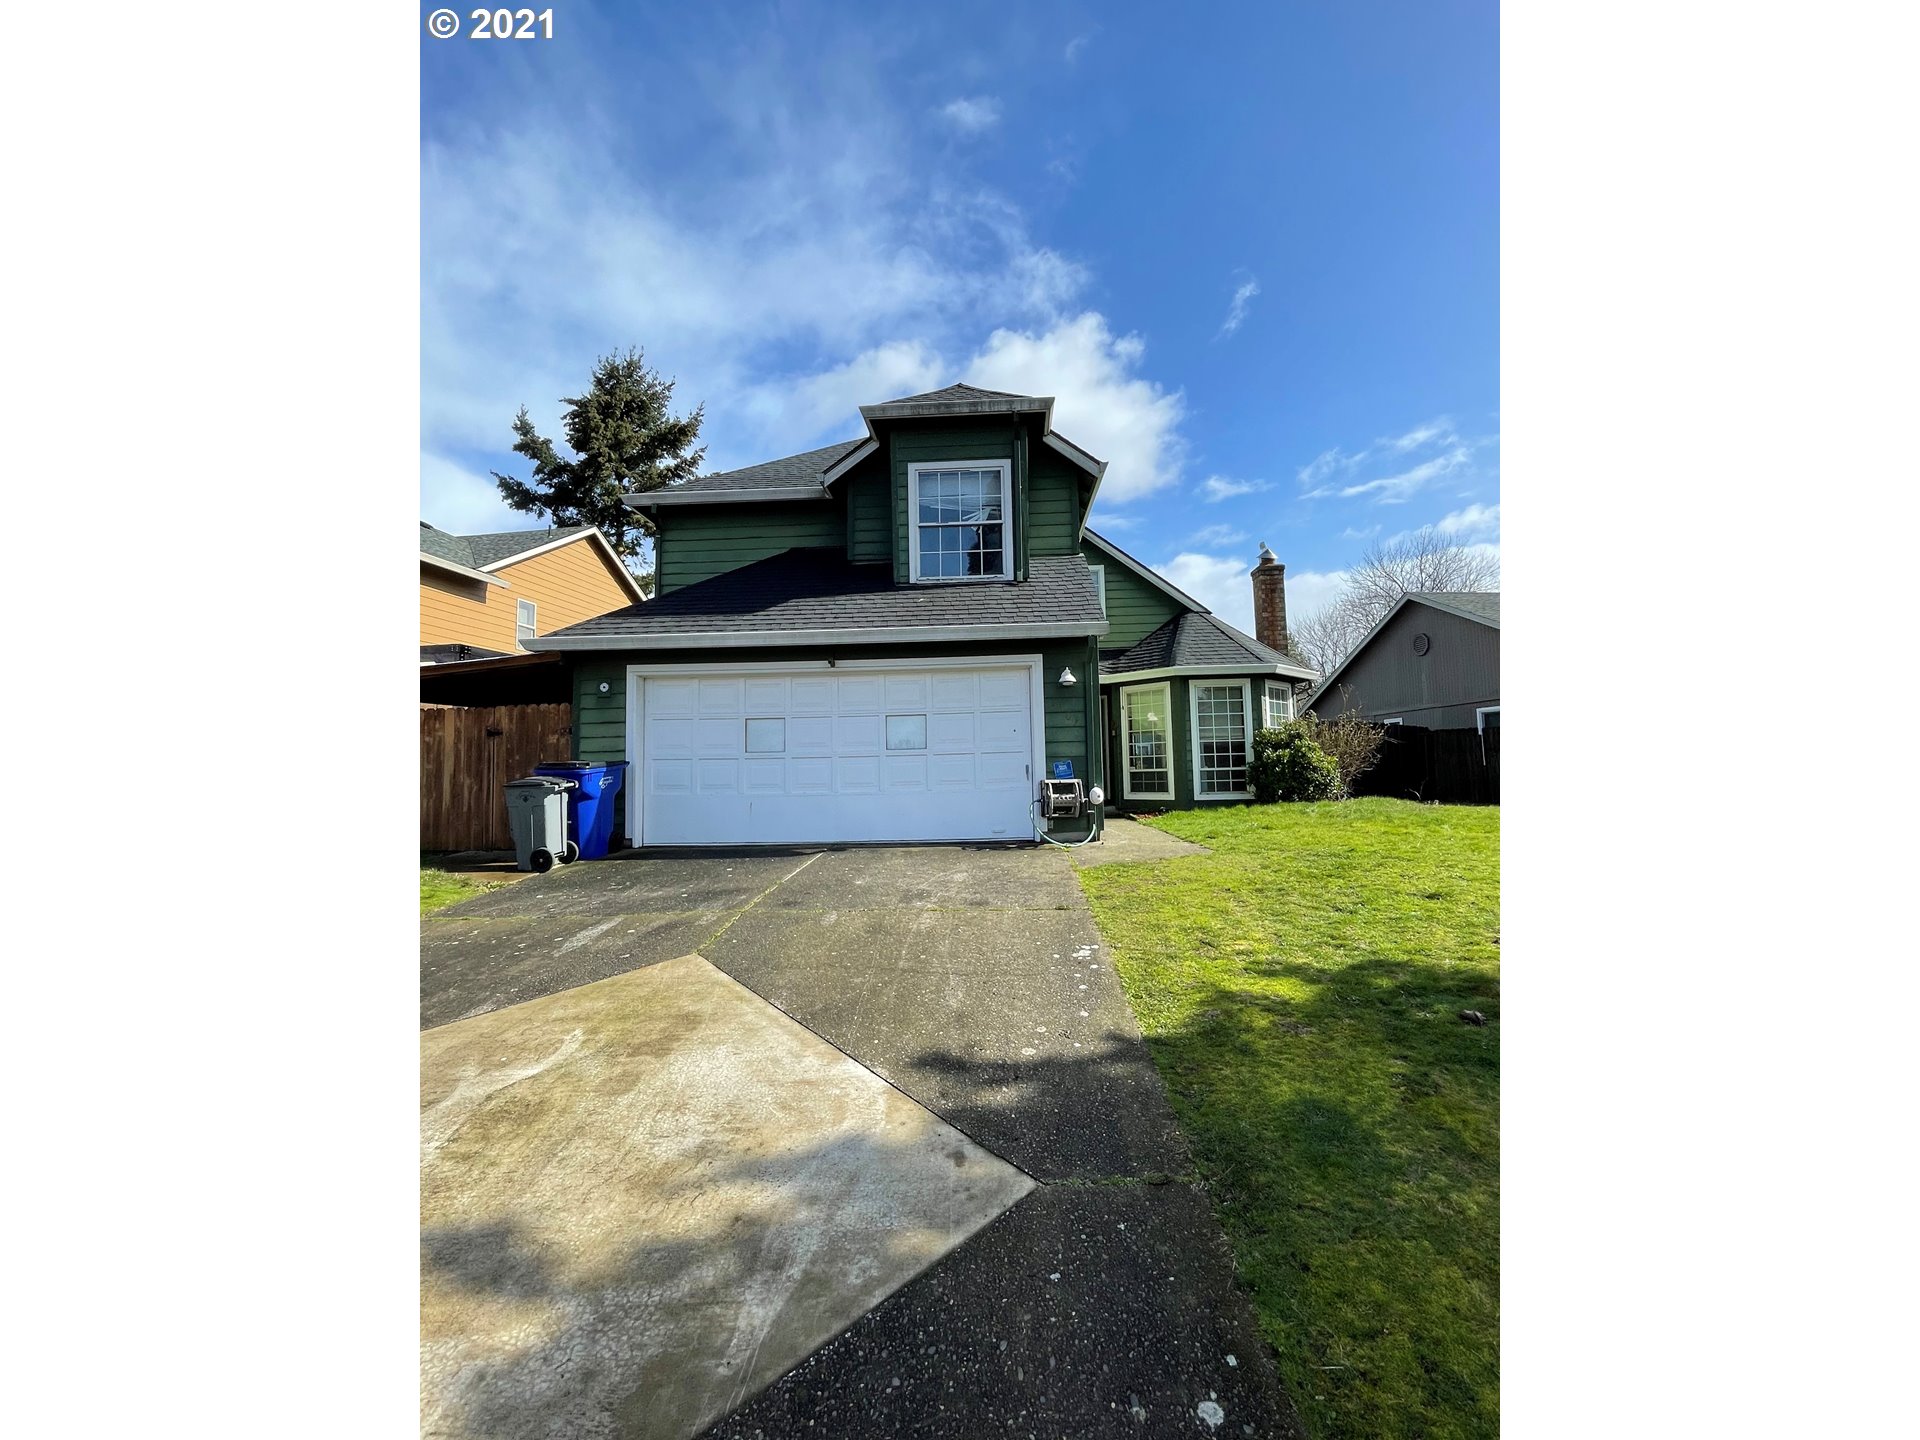 1307 SE 159TH AVE (1 of 6)